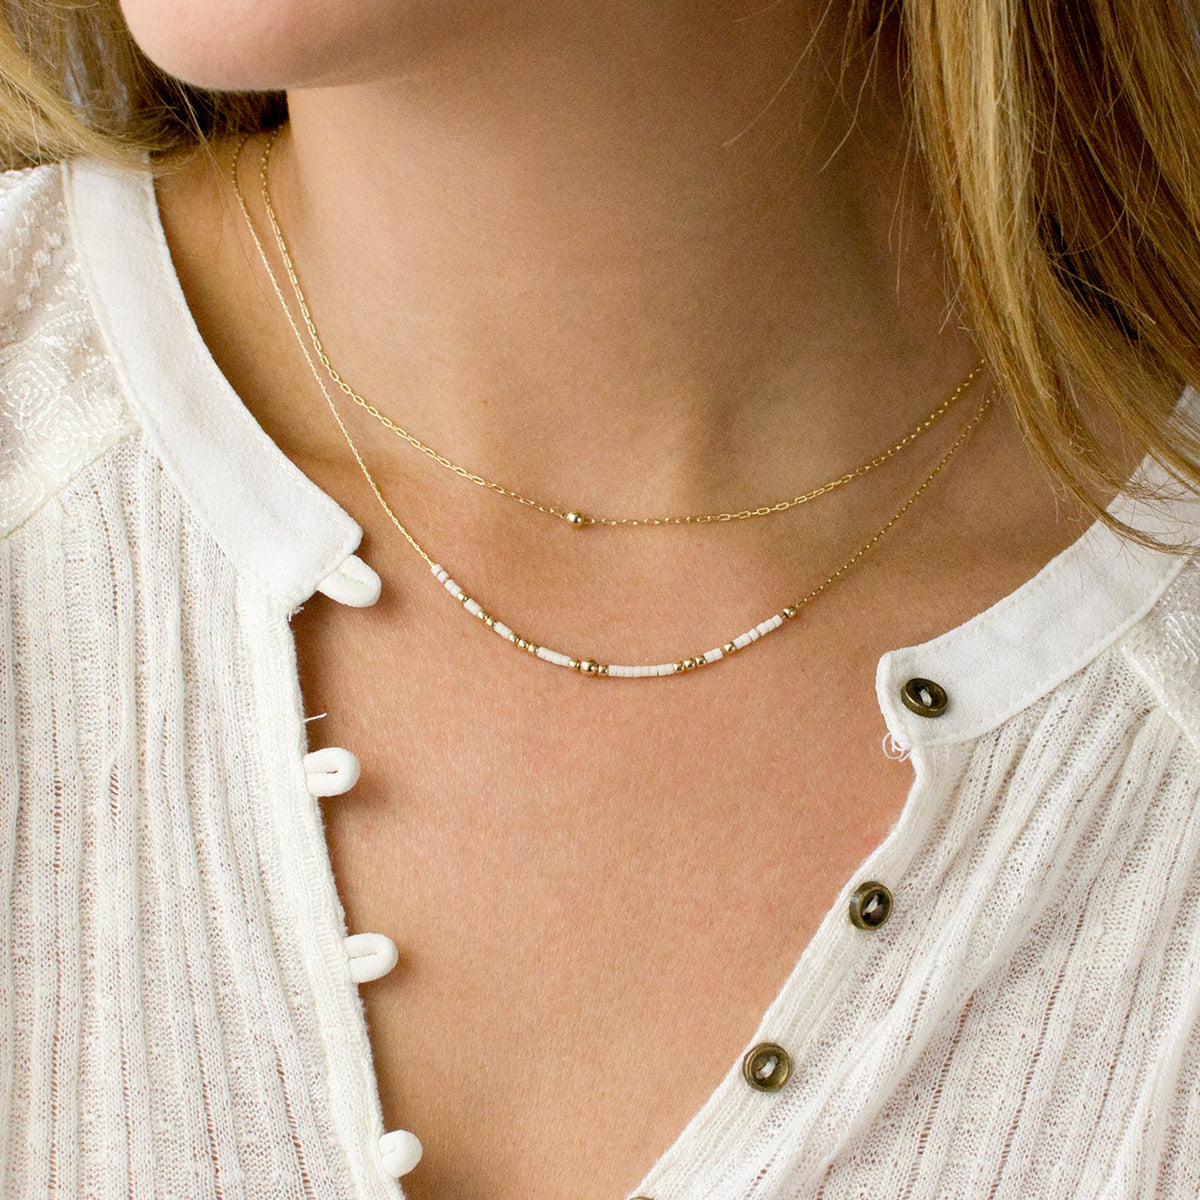 Morse Code Necklace - Love Collection